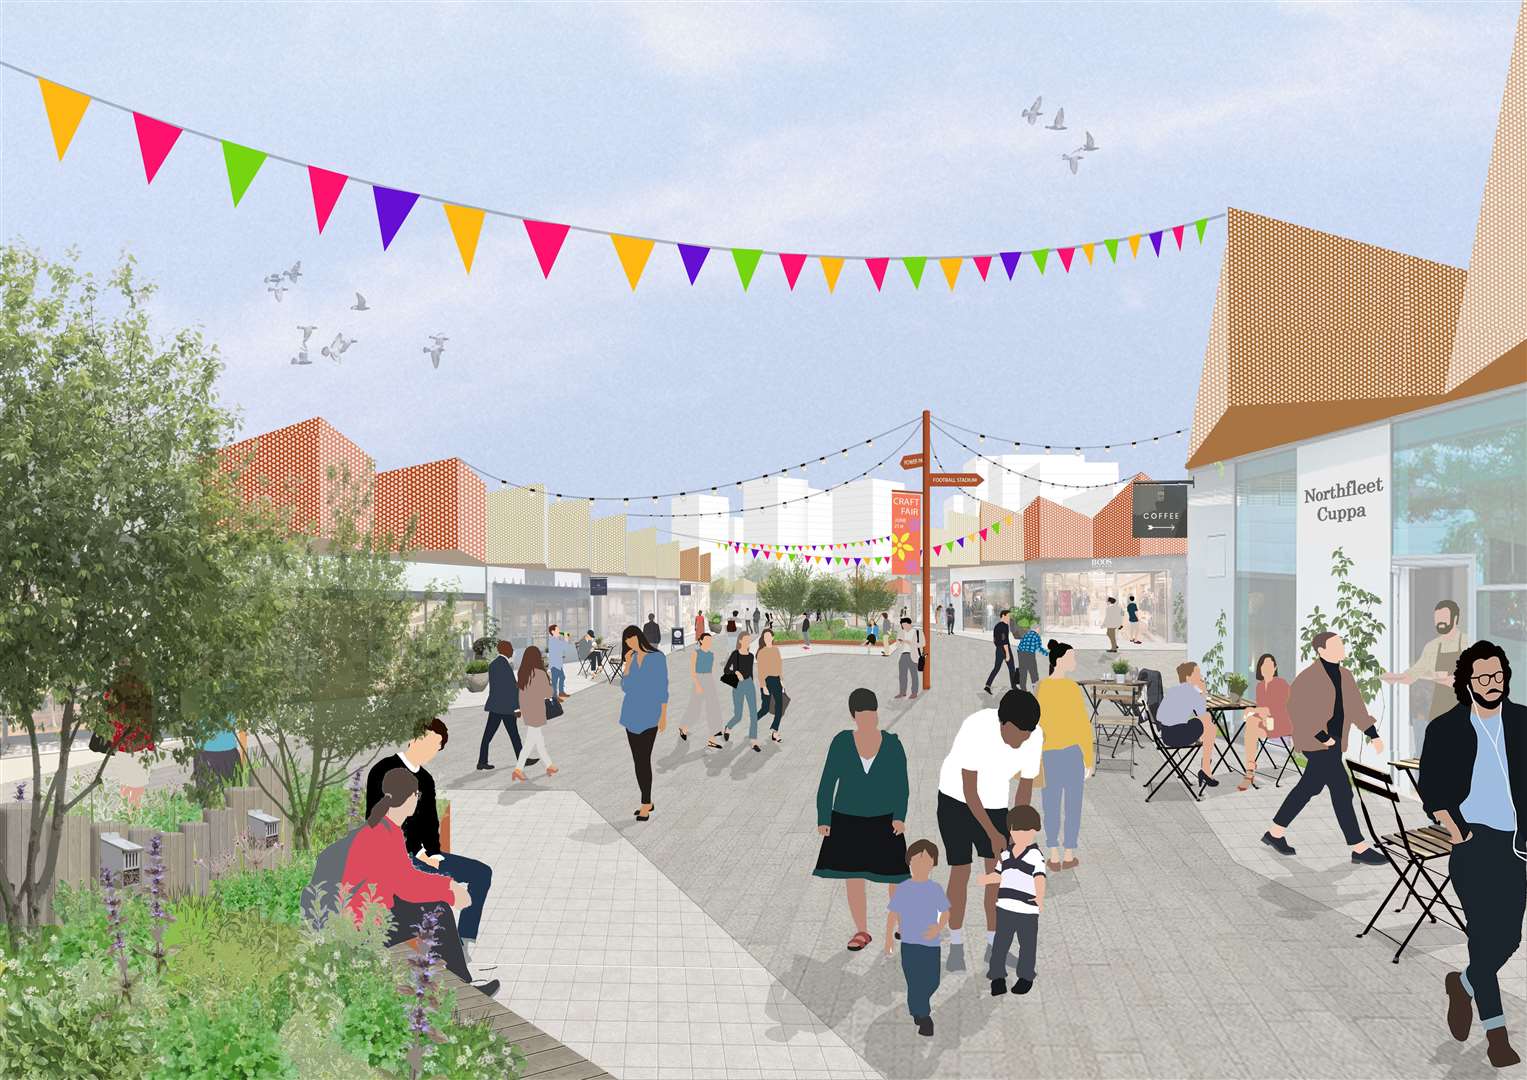 Plans feature a new retail village features a new retail village consisting of 225,000 sq ft of shops, restaurants, bars and cafes. Photo: Northfleet Harbourside